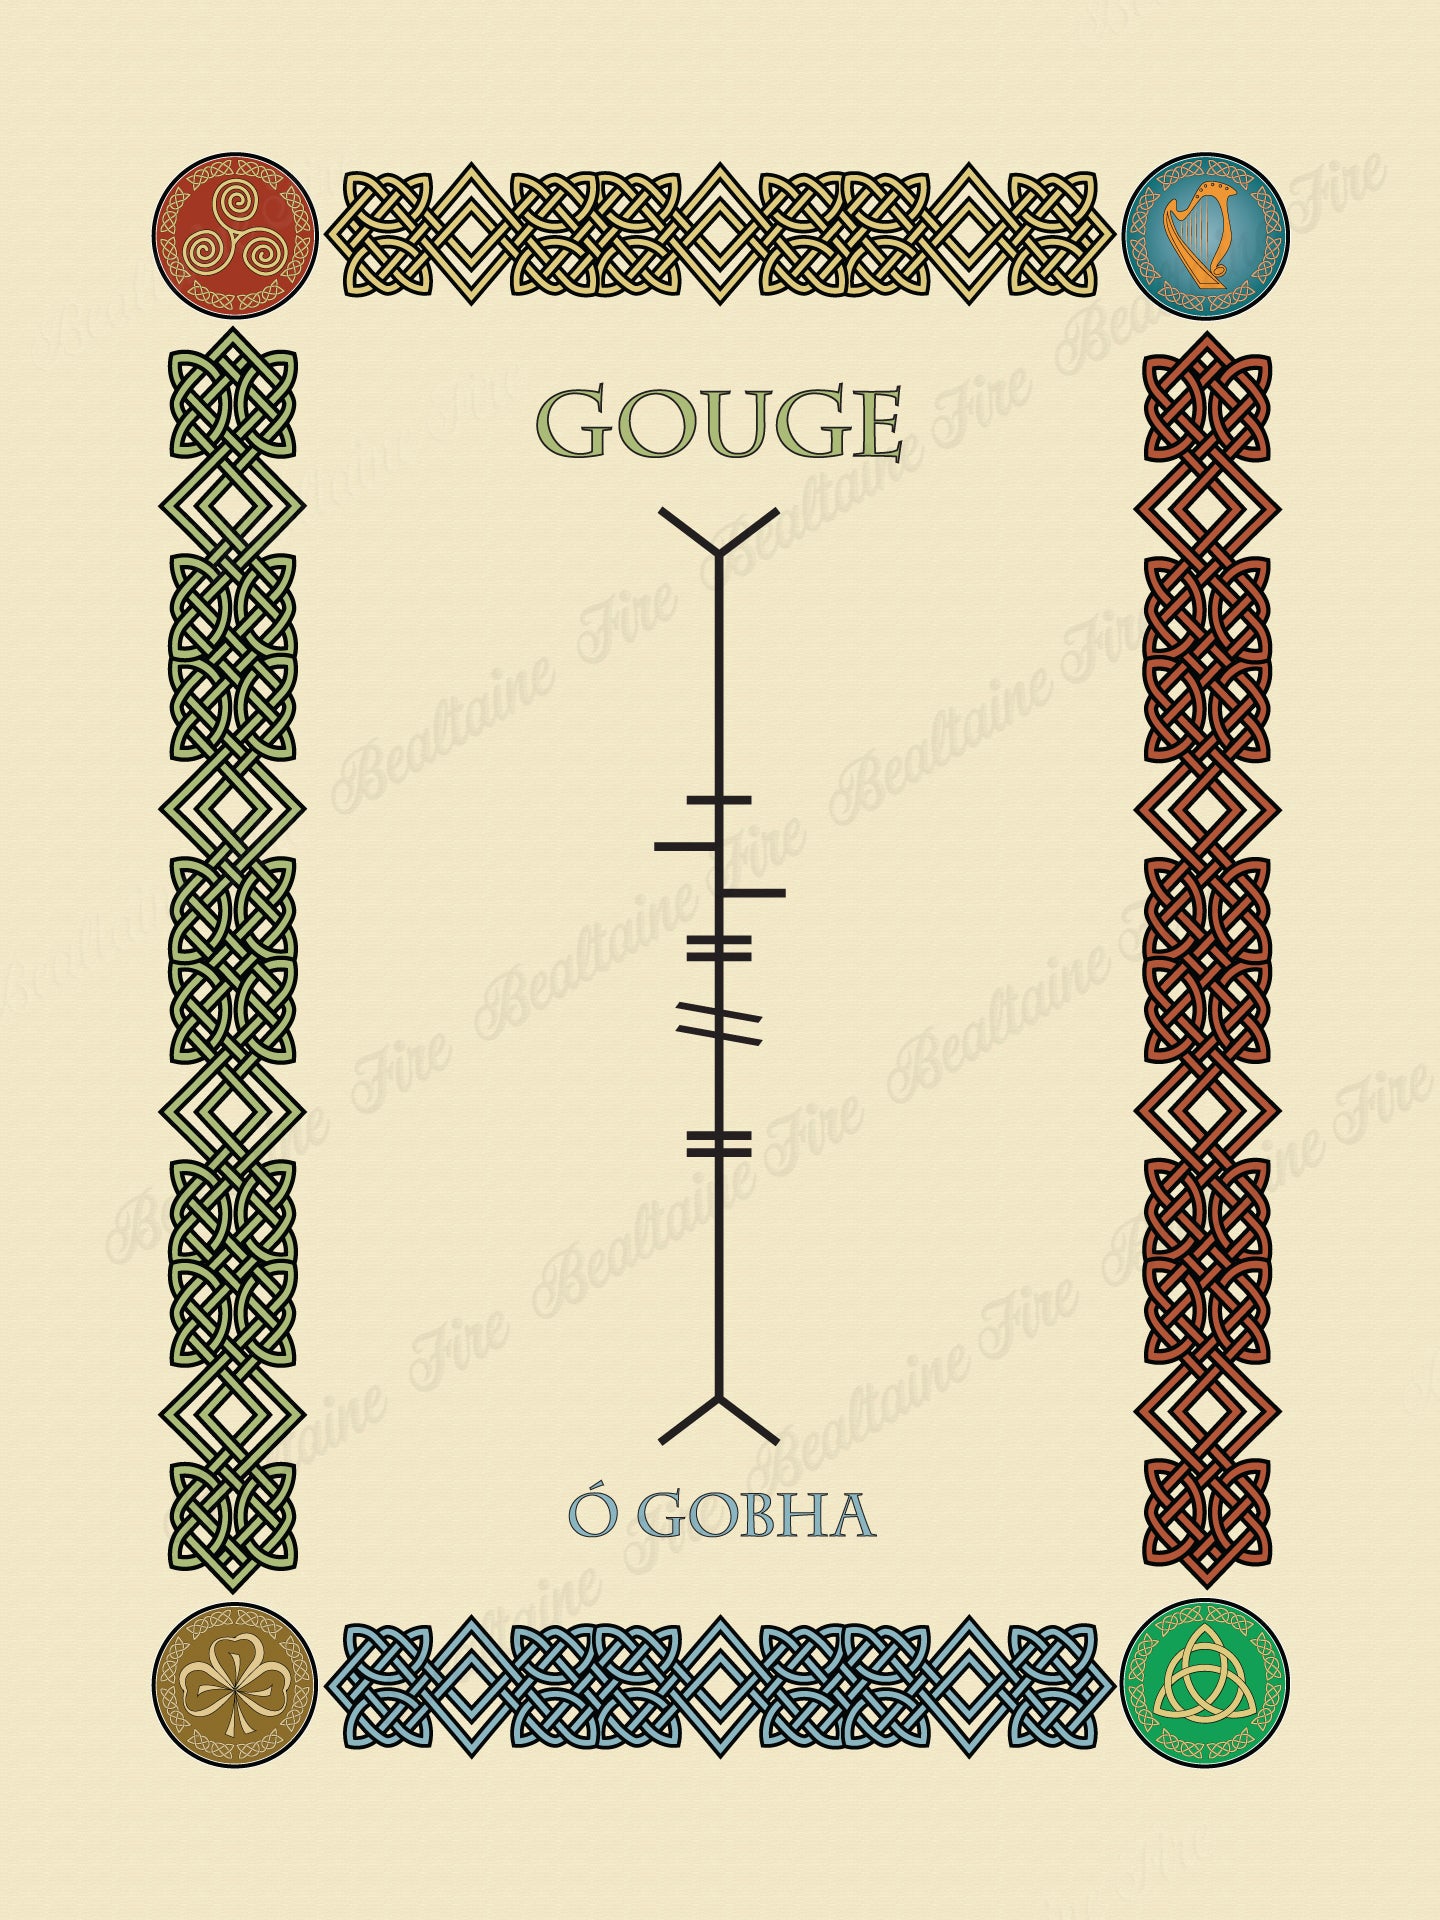 Gouge in Old Irish and Ogham - Premium luster unframed print